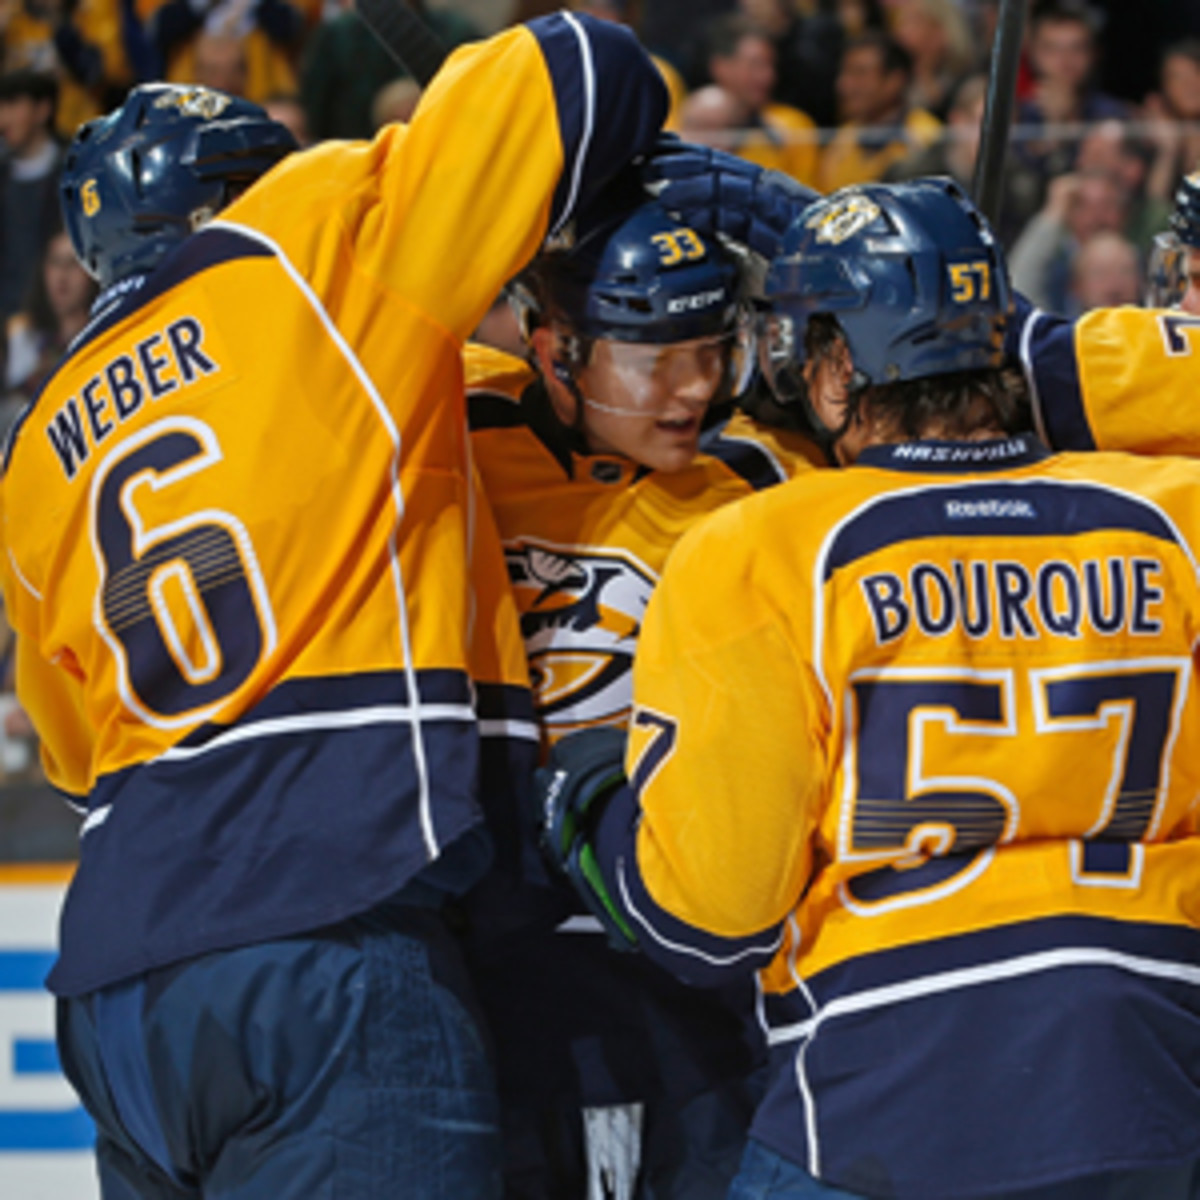 Season-ending injuries to forwards Colin Wilson and Gabriel Bourque has hurt the Predators playoff chances. (John Russell/Getty Images)